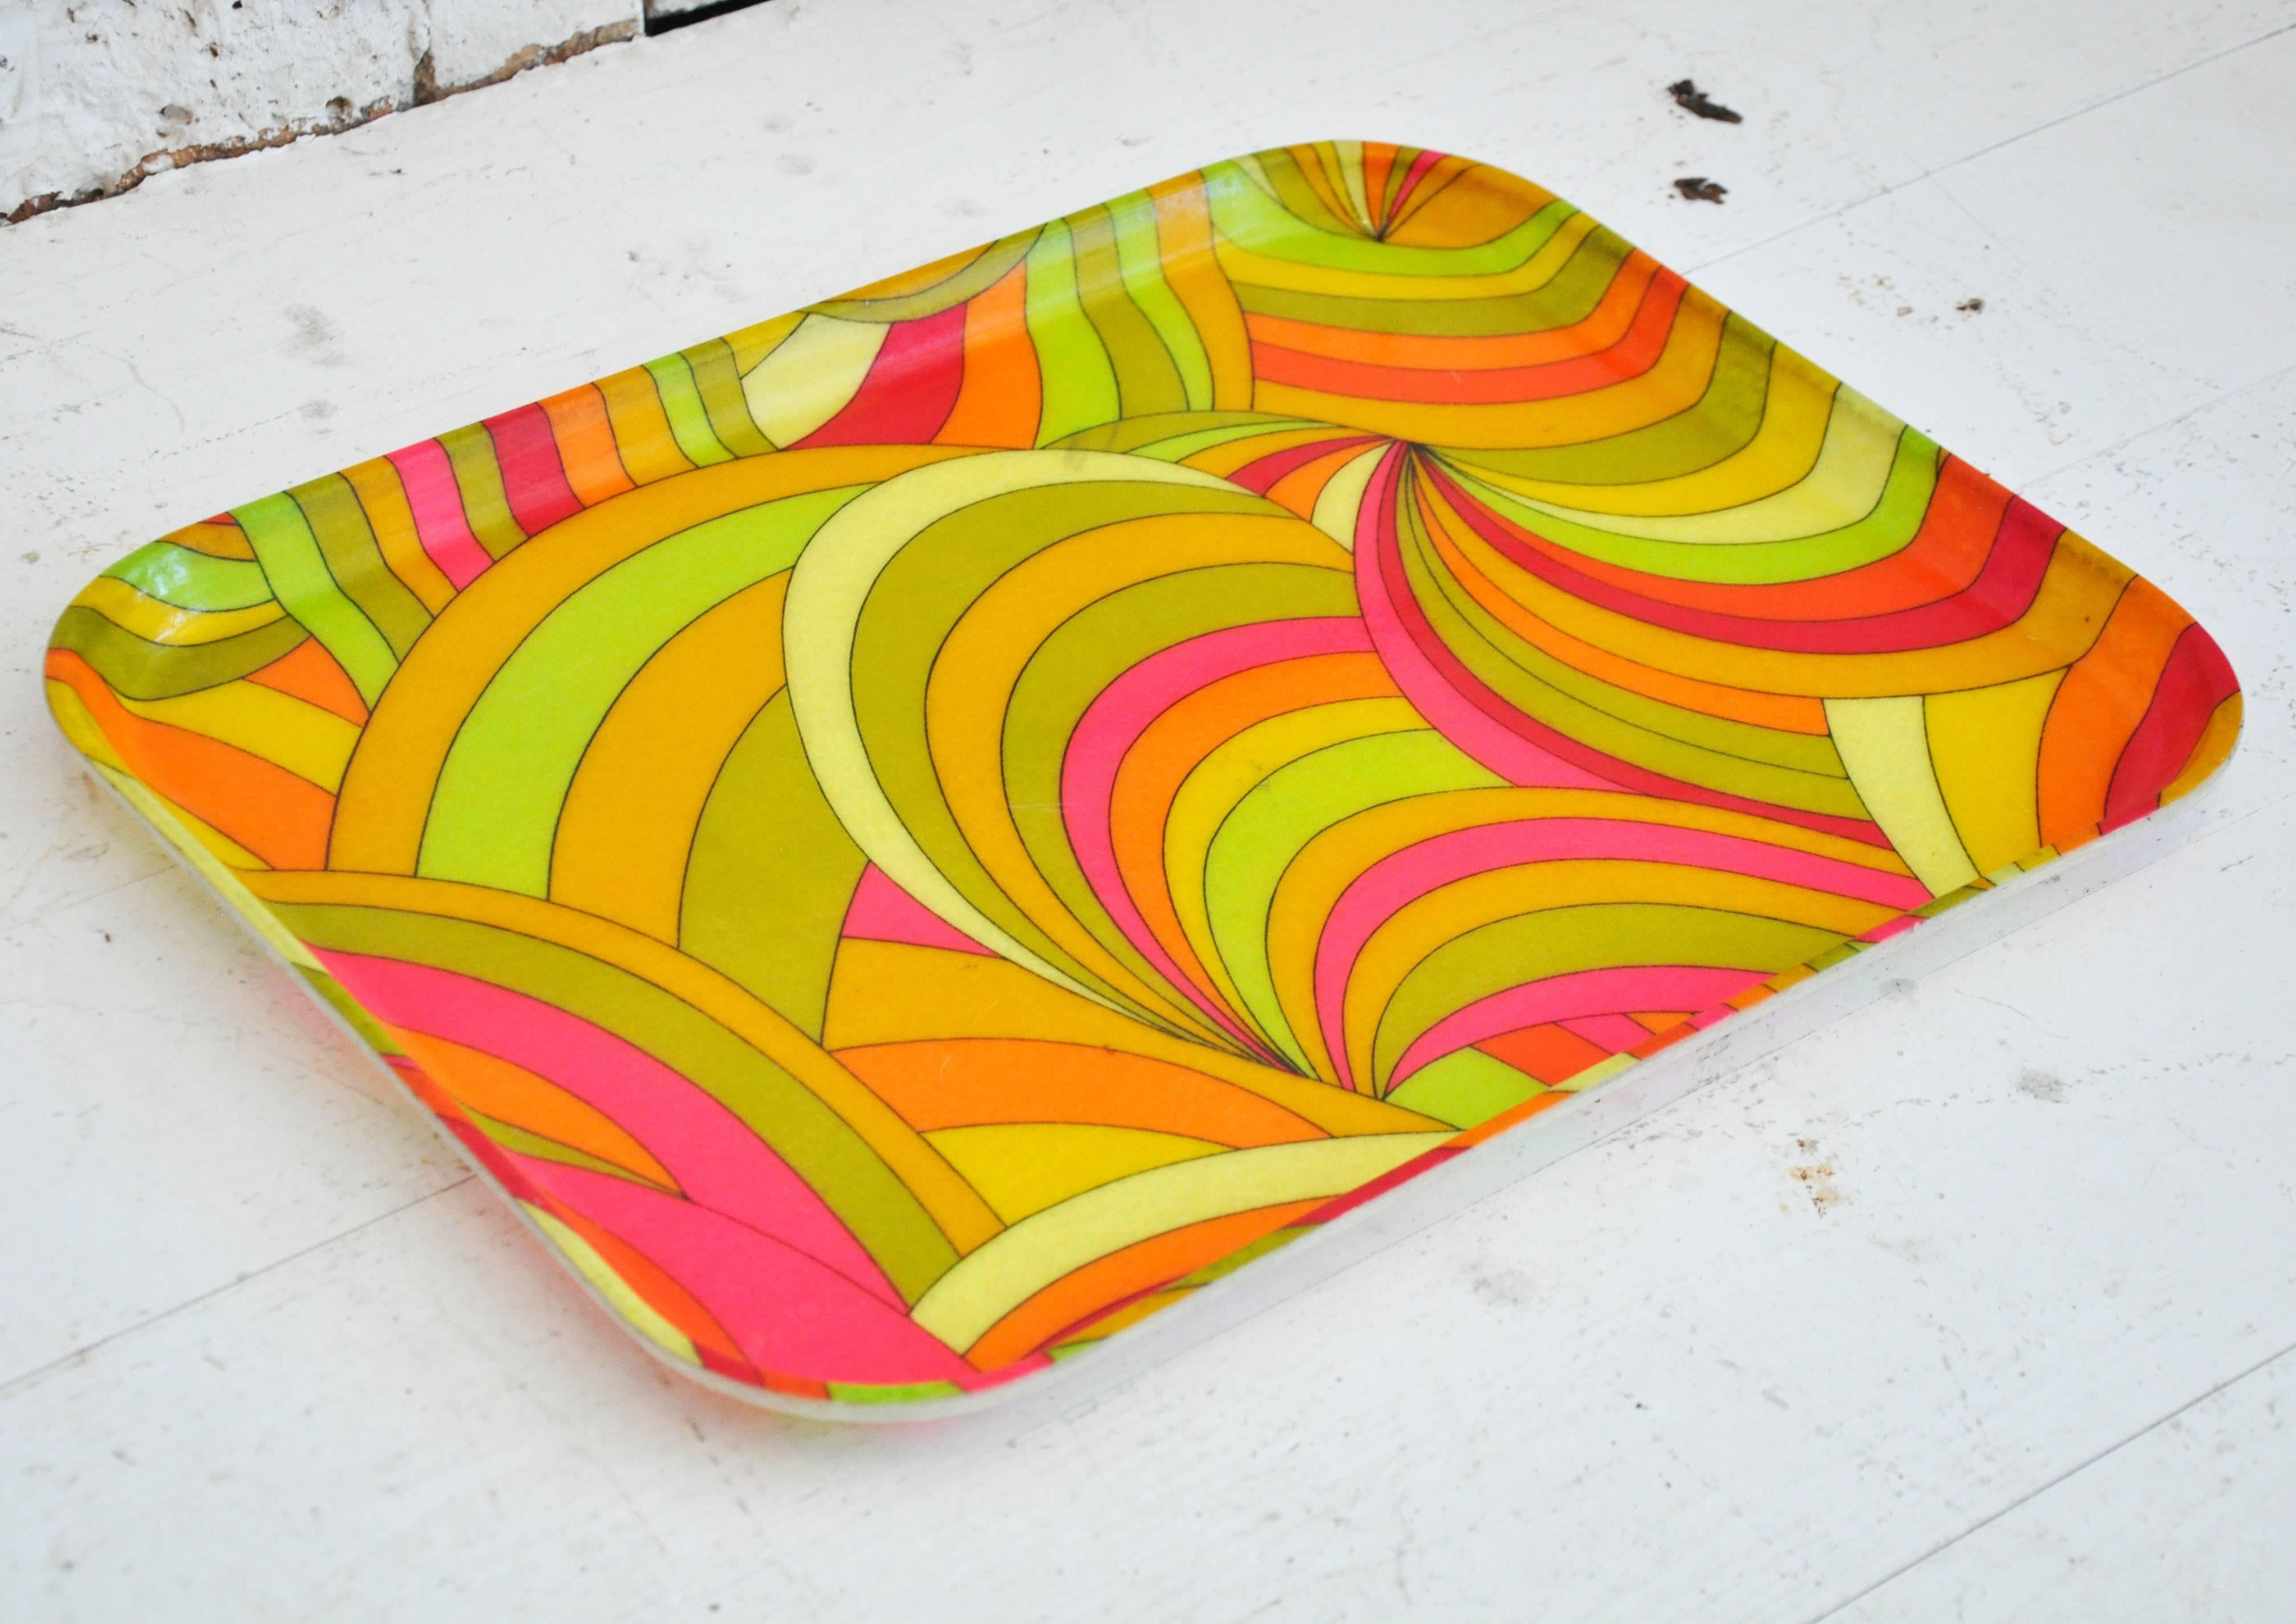 Colorful to the hilt! This vintage plastic tray makes a statement on a tabletop or as a backdrop within book shelving. Mad, mod and wonderful.